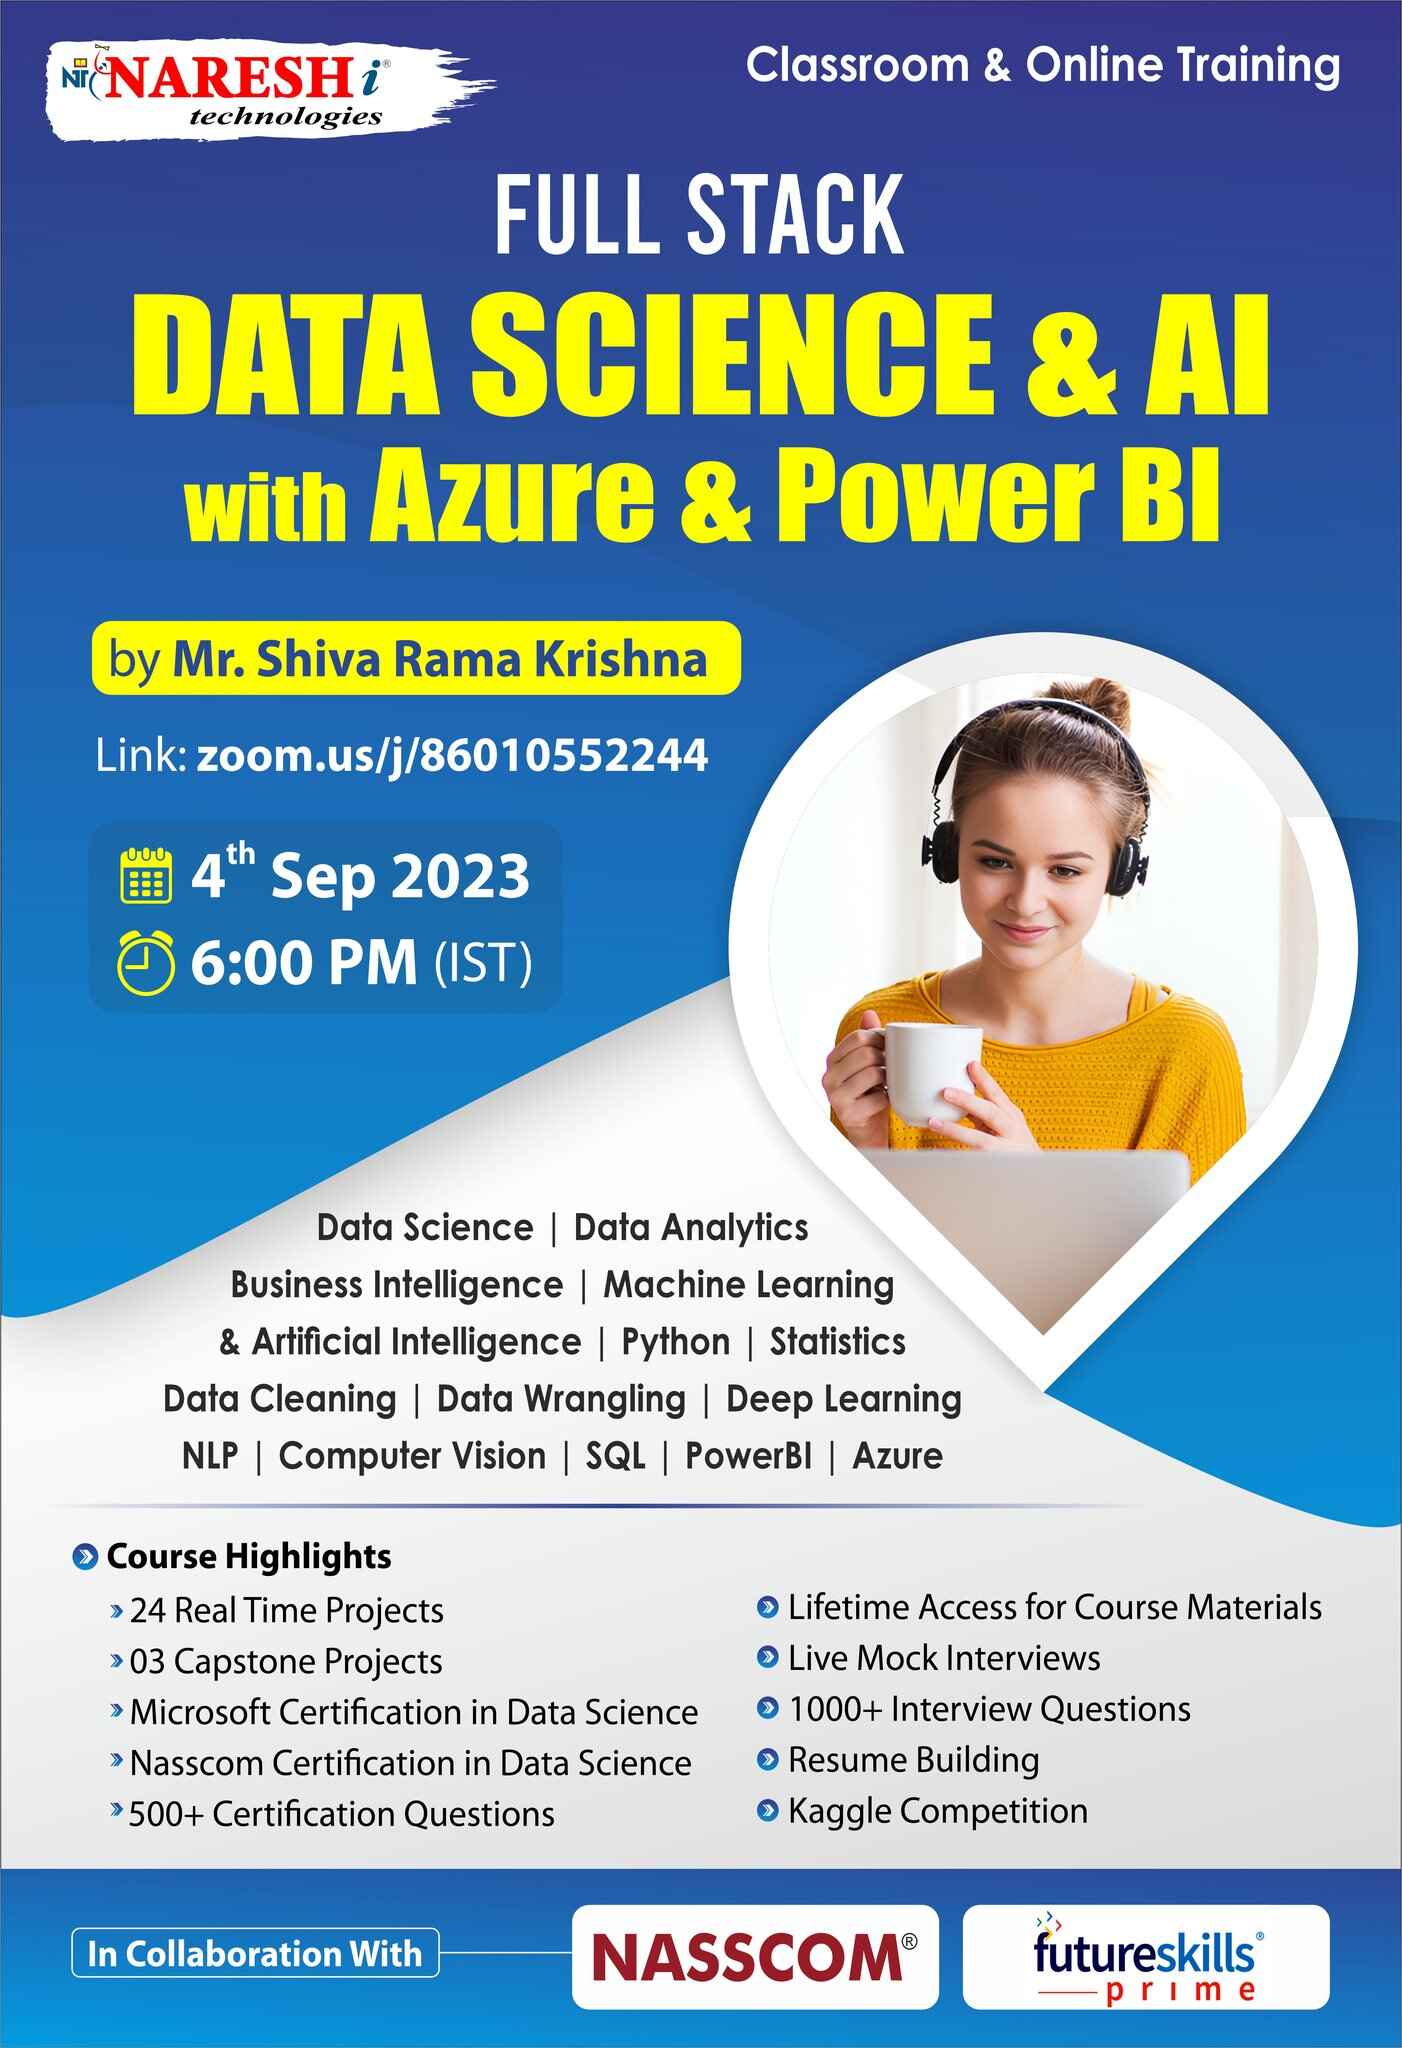 Free Demo On Full Stack Data Science & AI with Azure & Power BI - Naresh IT, Online Event